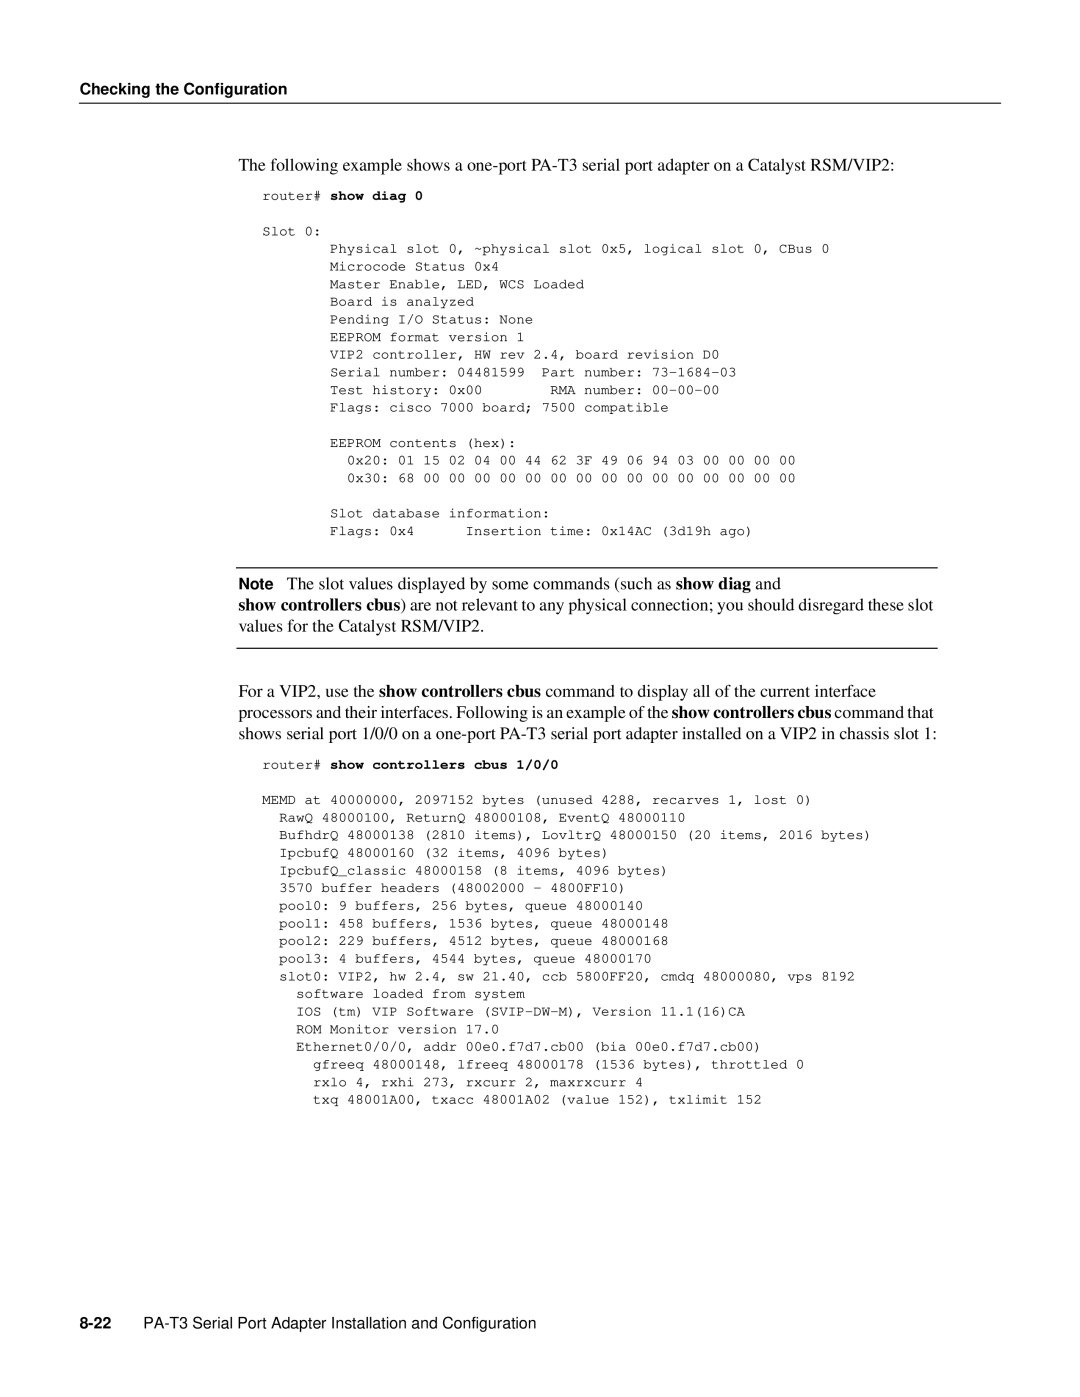 Cisco Systems PA-T3 manual Note The slot values displayed by some commands such as show diag and 